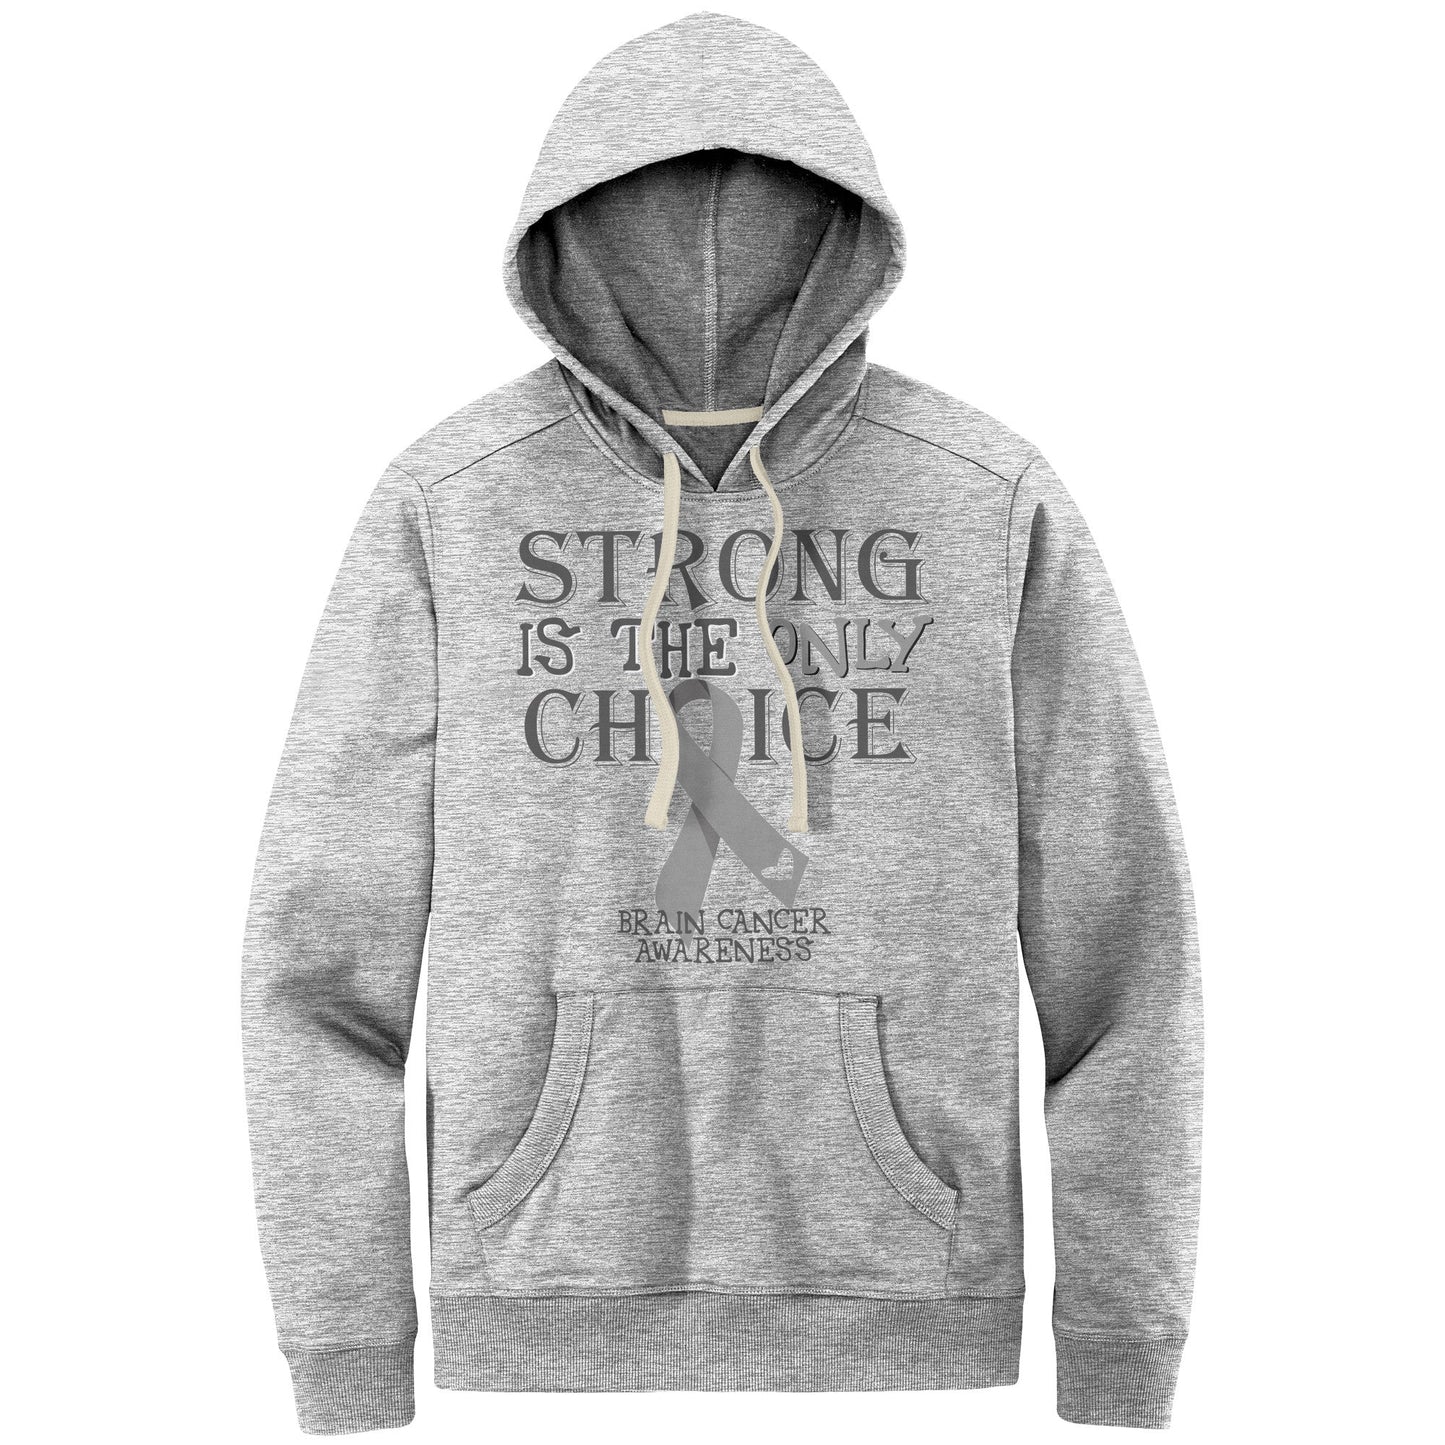 Strong is the Only Choice -Brain Cancer Awareness T-Shirt, Hoodie, Tank |x|